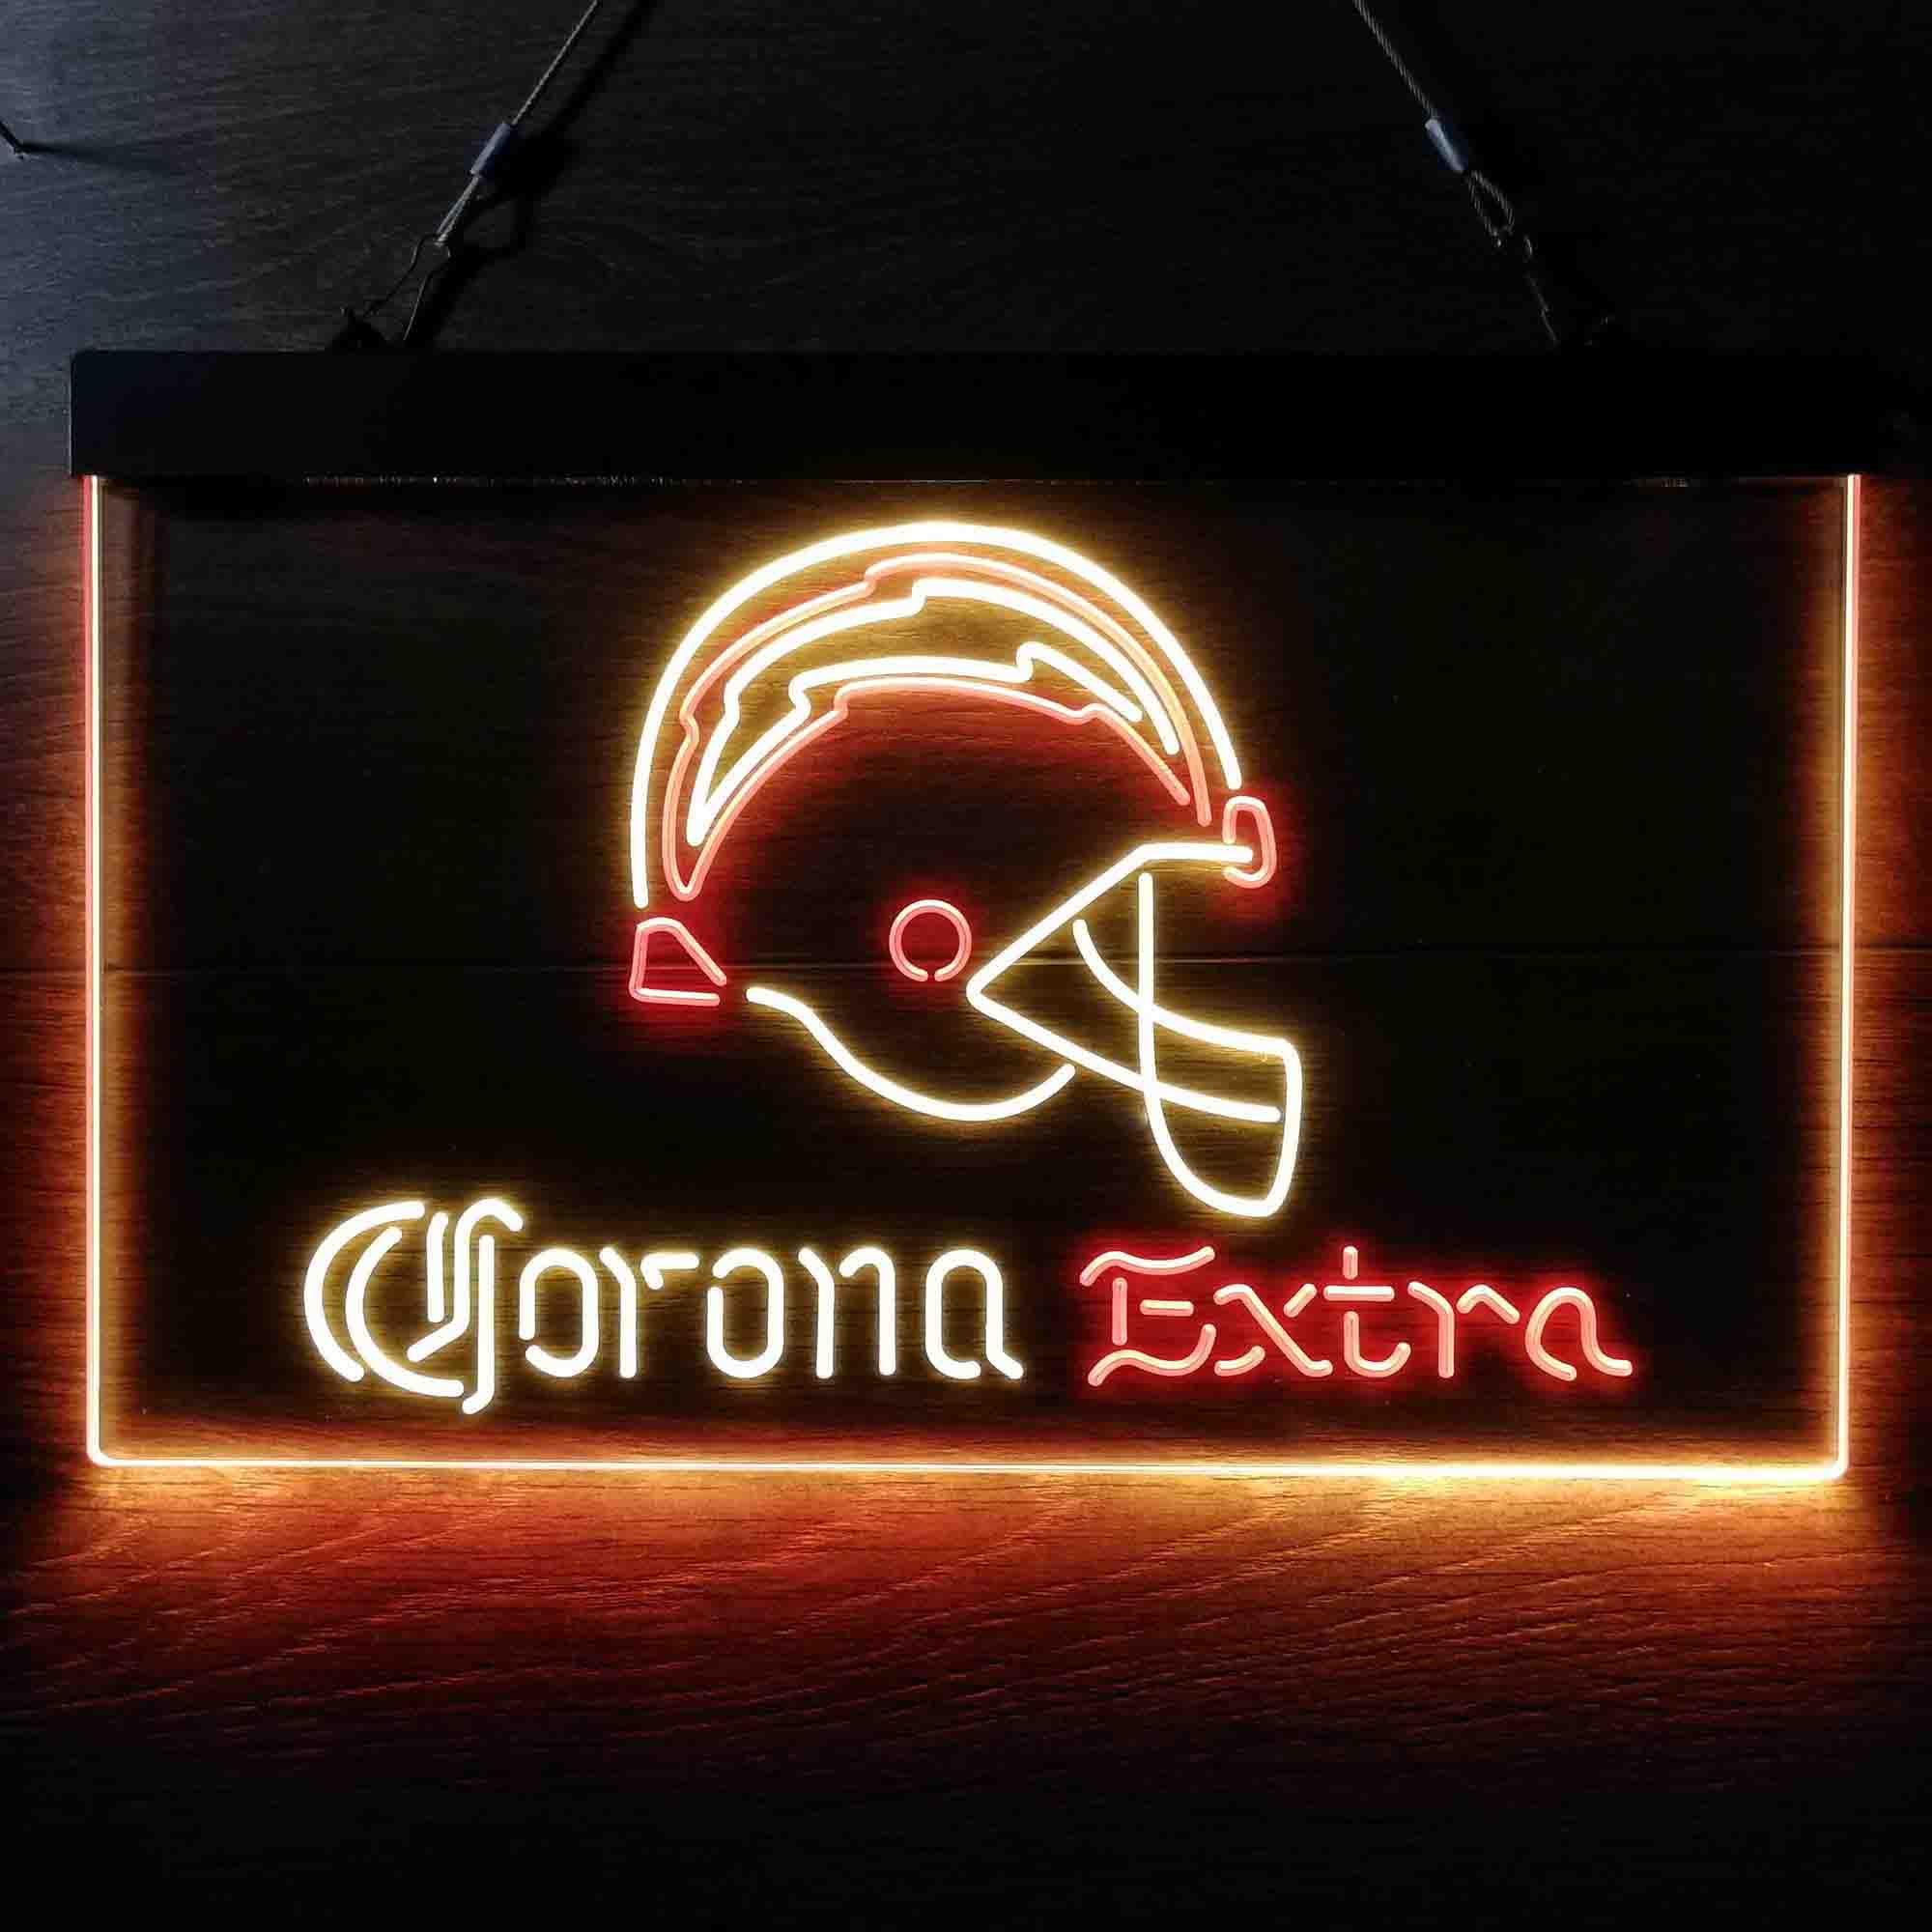 Corona Extra Bar Los Angeles Chargers Est. 1960 LED Neon Sign